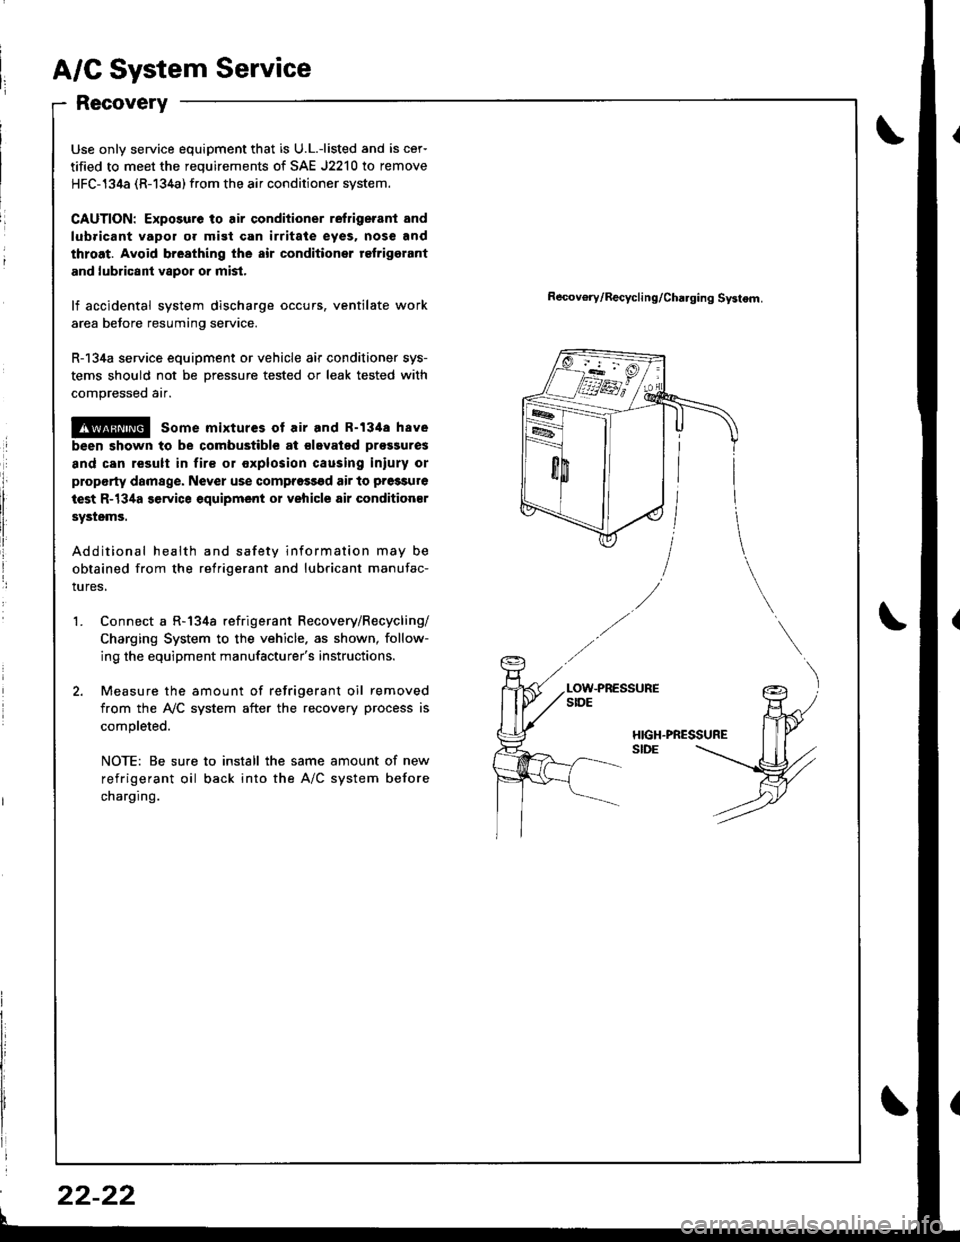 HONDA INTEGRA 1998 4.G Workshop Manual A/C System Service
Recovery
Use only service equipment that is U.L.-listed and is cer-
tified to meet the requirements of SAE J2210 to remove
HFC-134a (R-134a) from the air conditioner system.
CAUTION